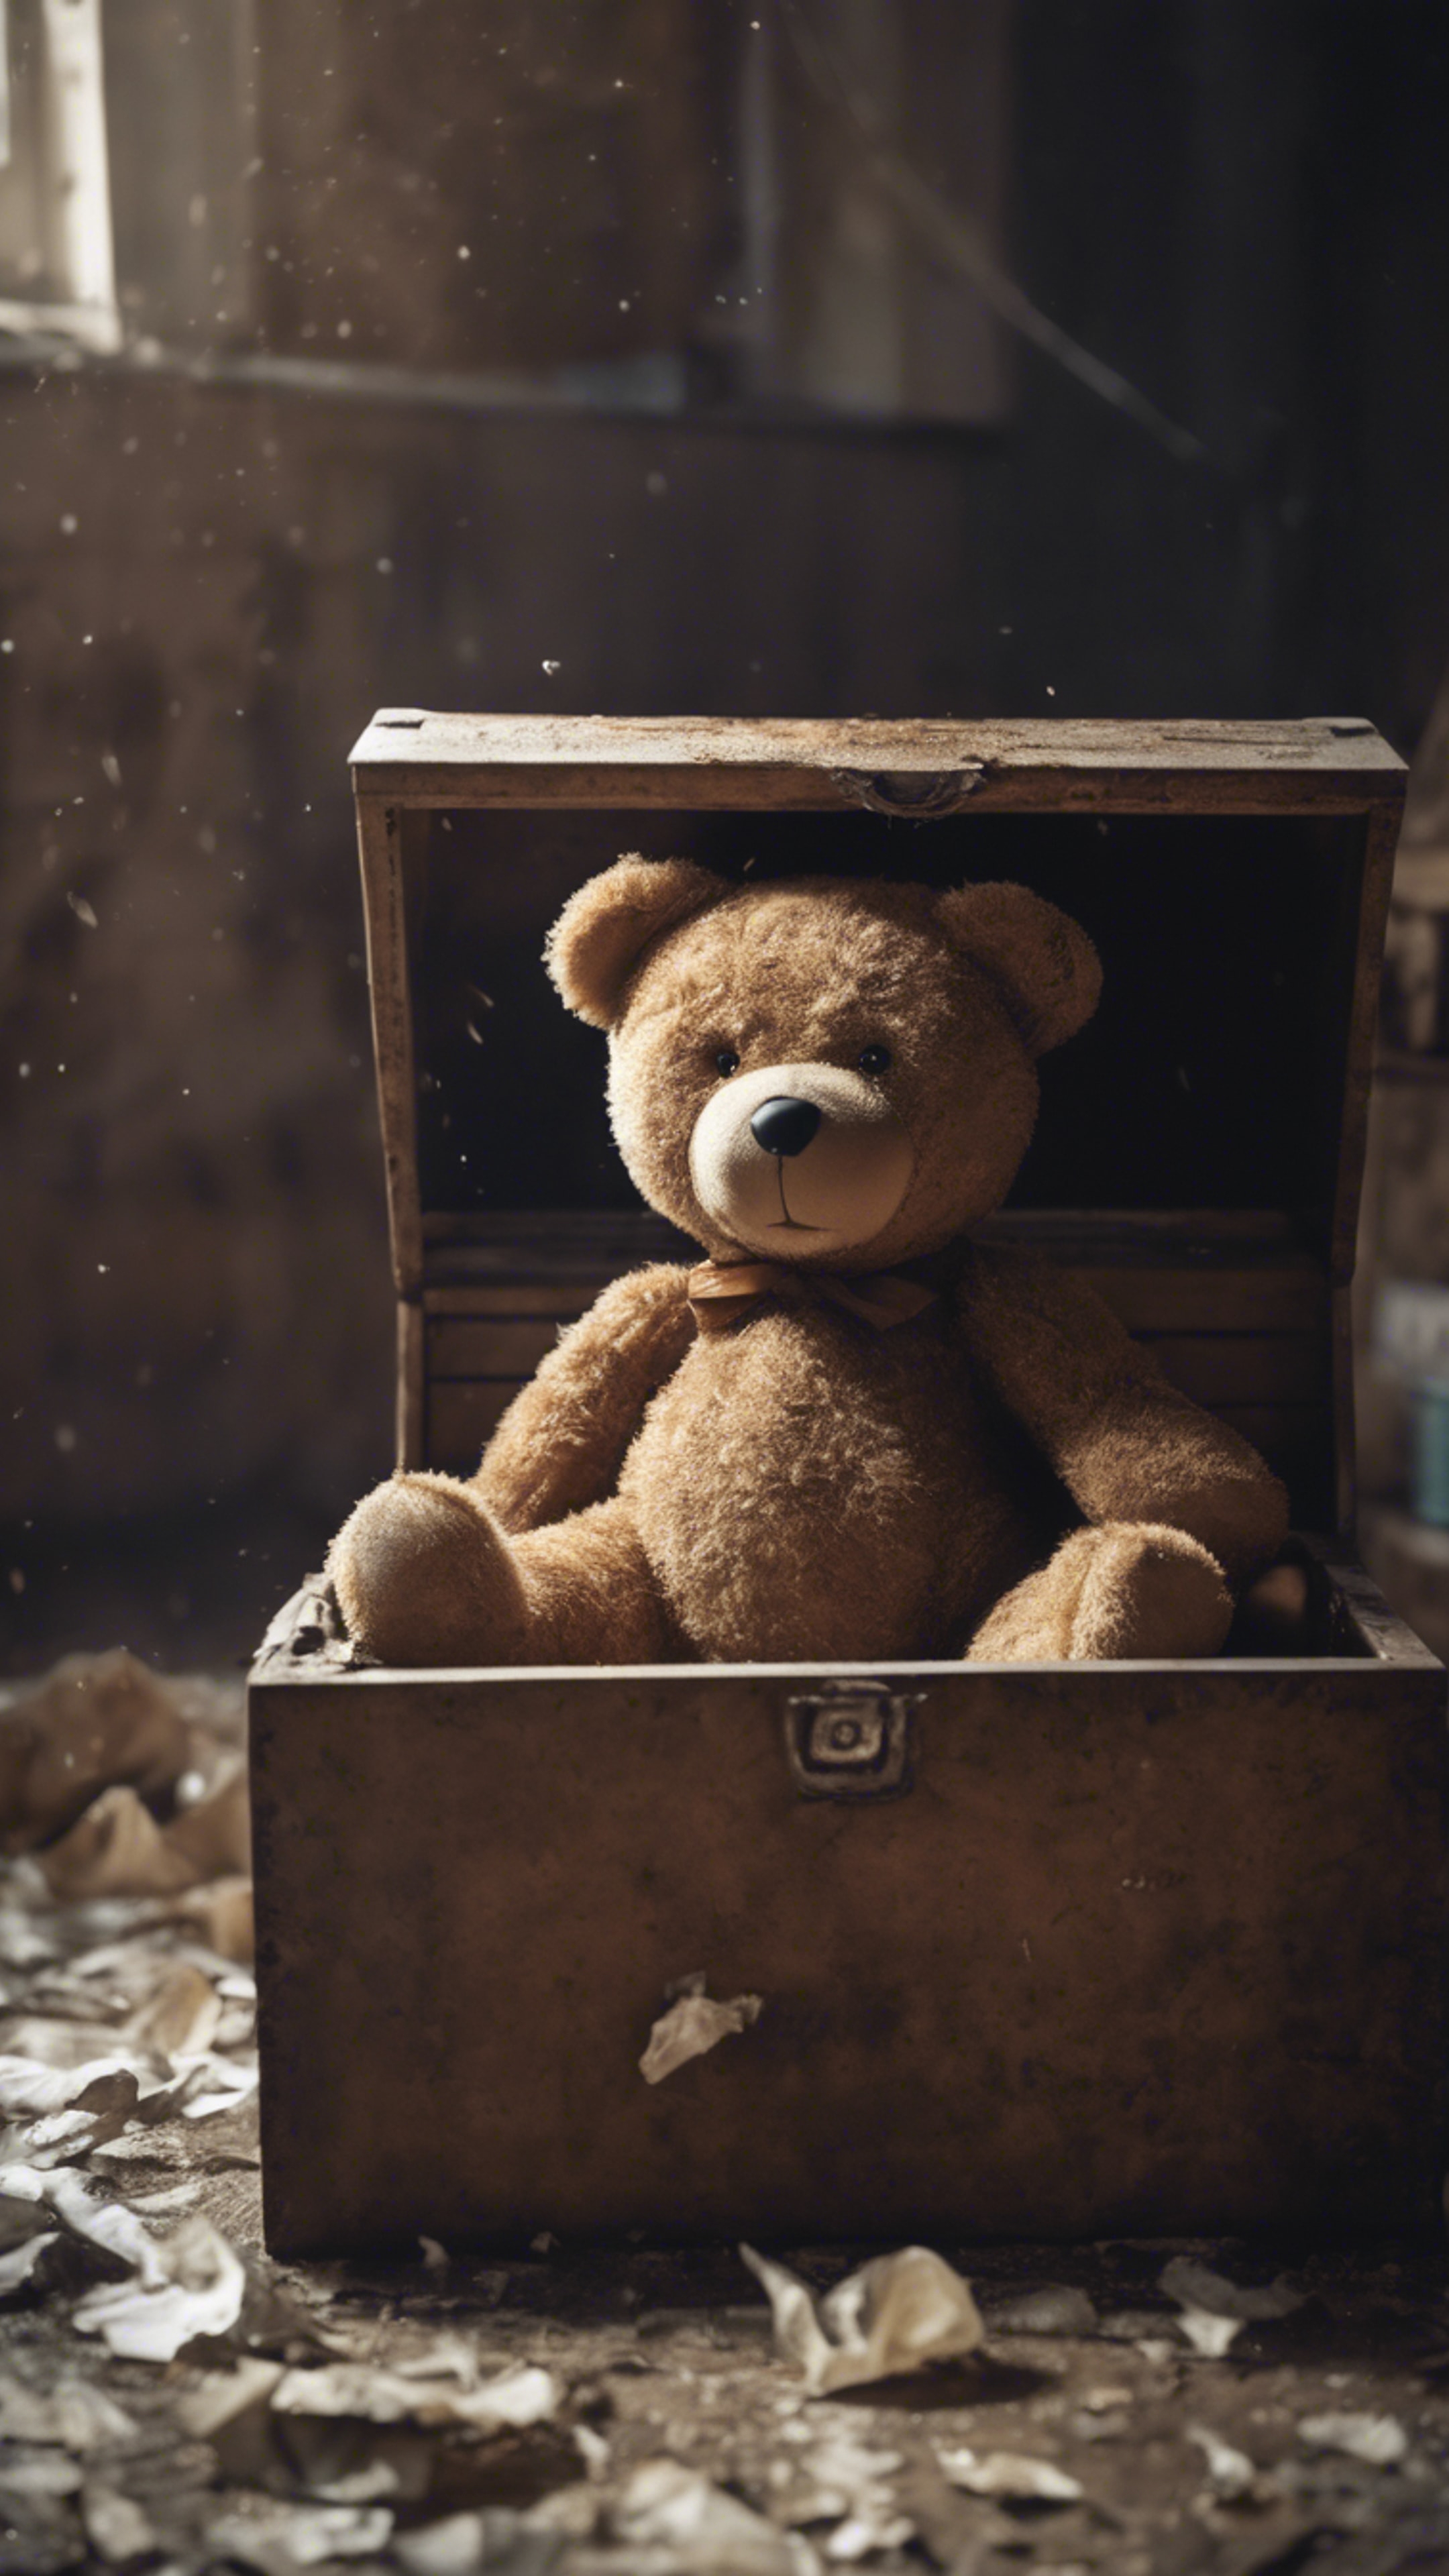 A haunted teddy bear lying in a forgotten toy box, a tear-stained face staring blankly at the ceiling. ផ្ទាំង​រូបភាព[ba9bf5e8e31a4c05a94a]